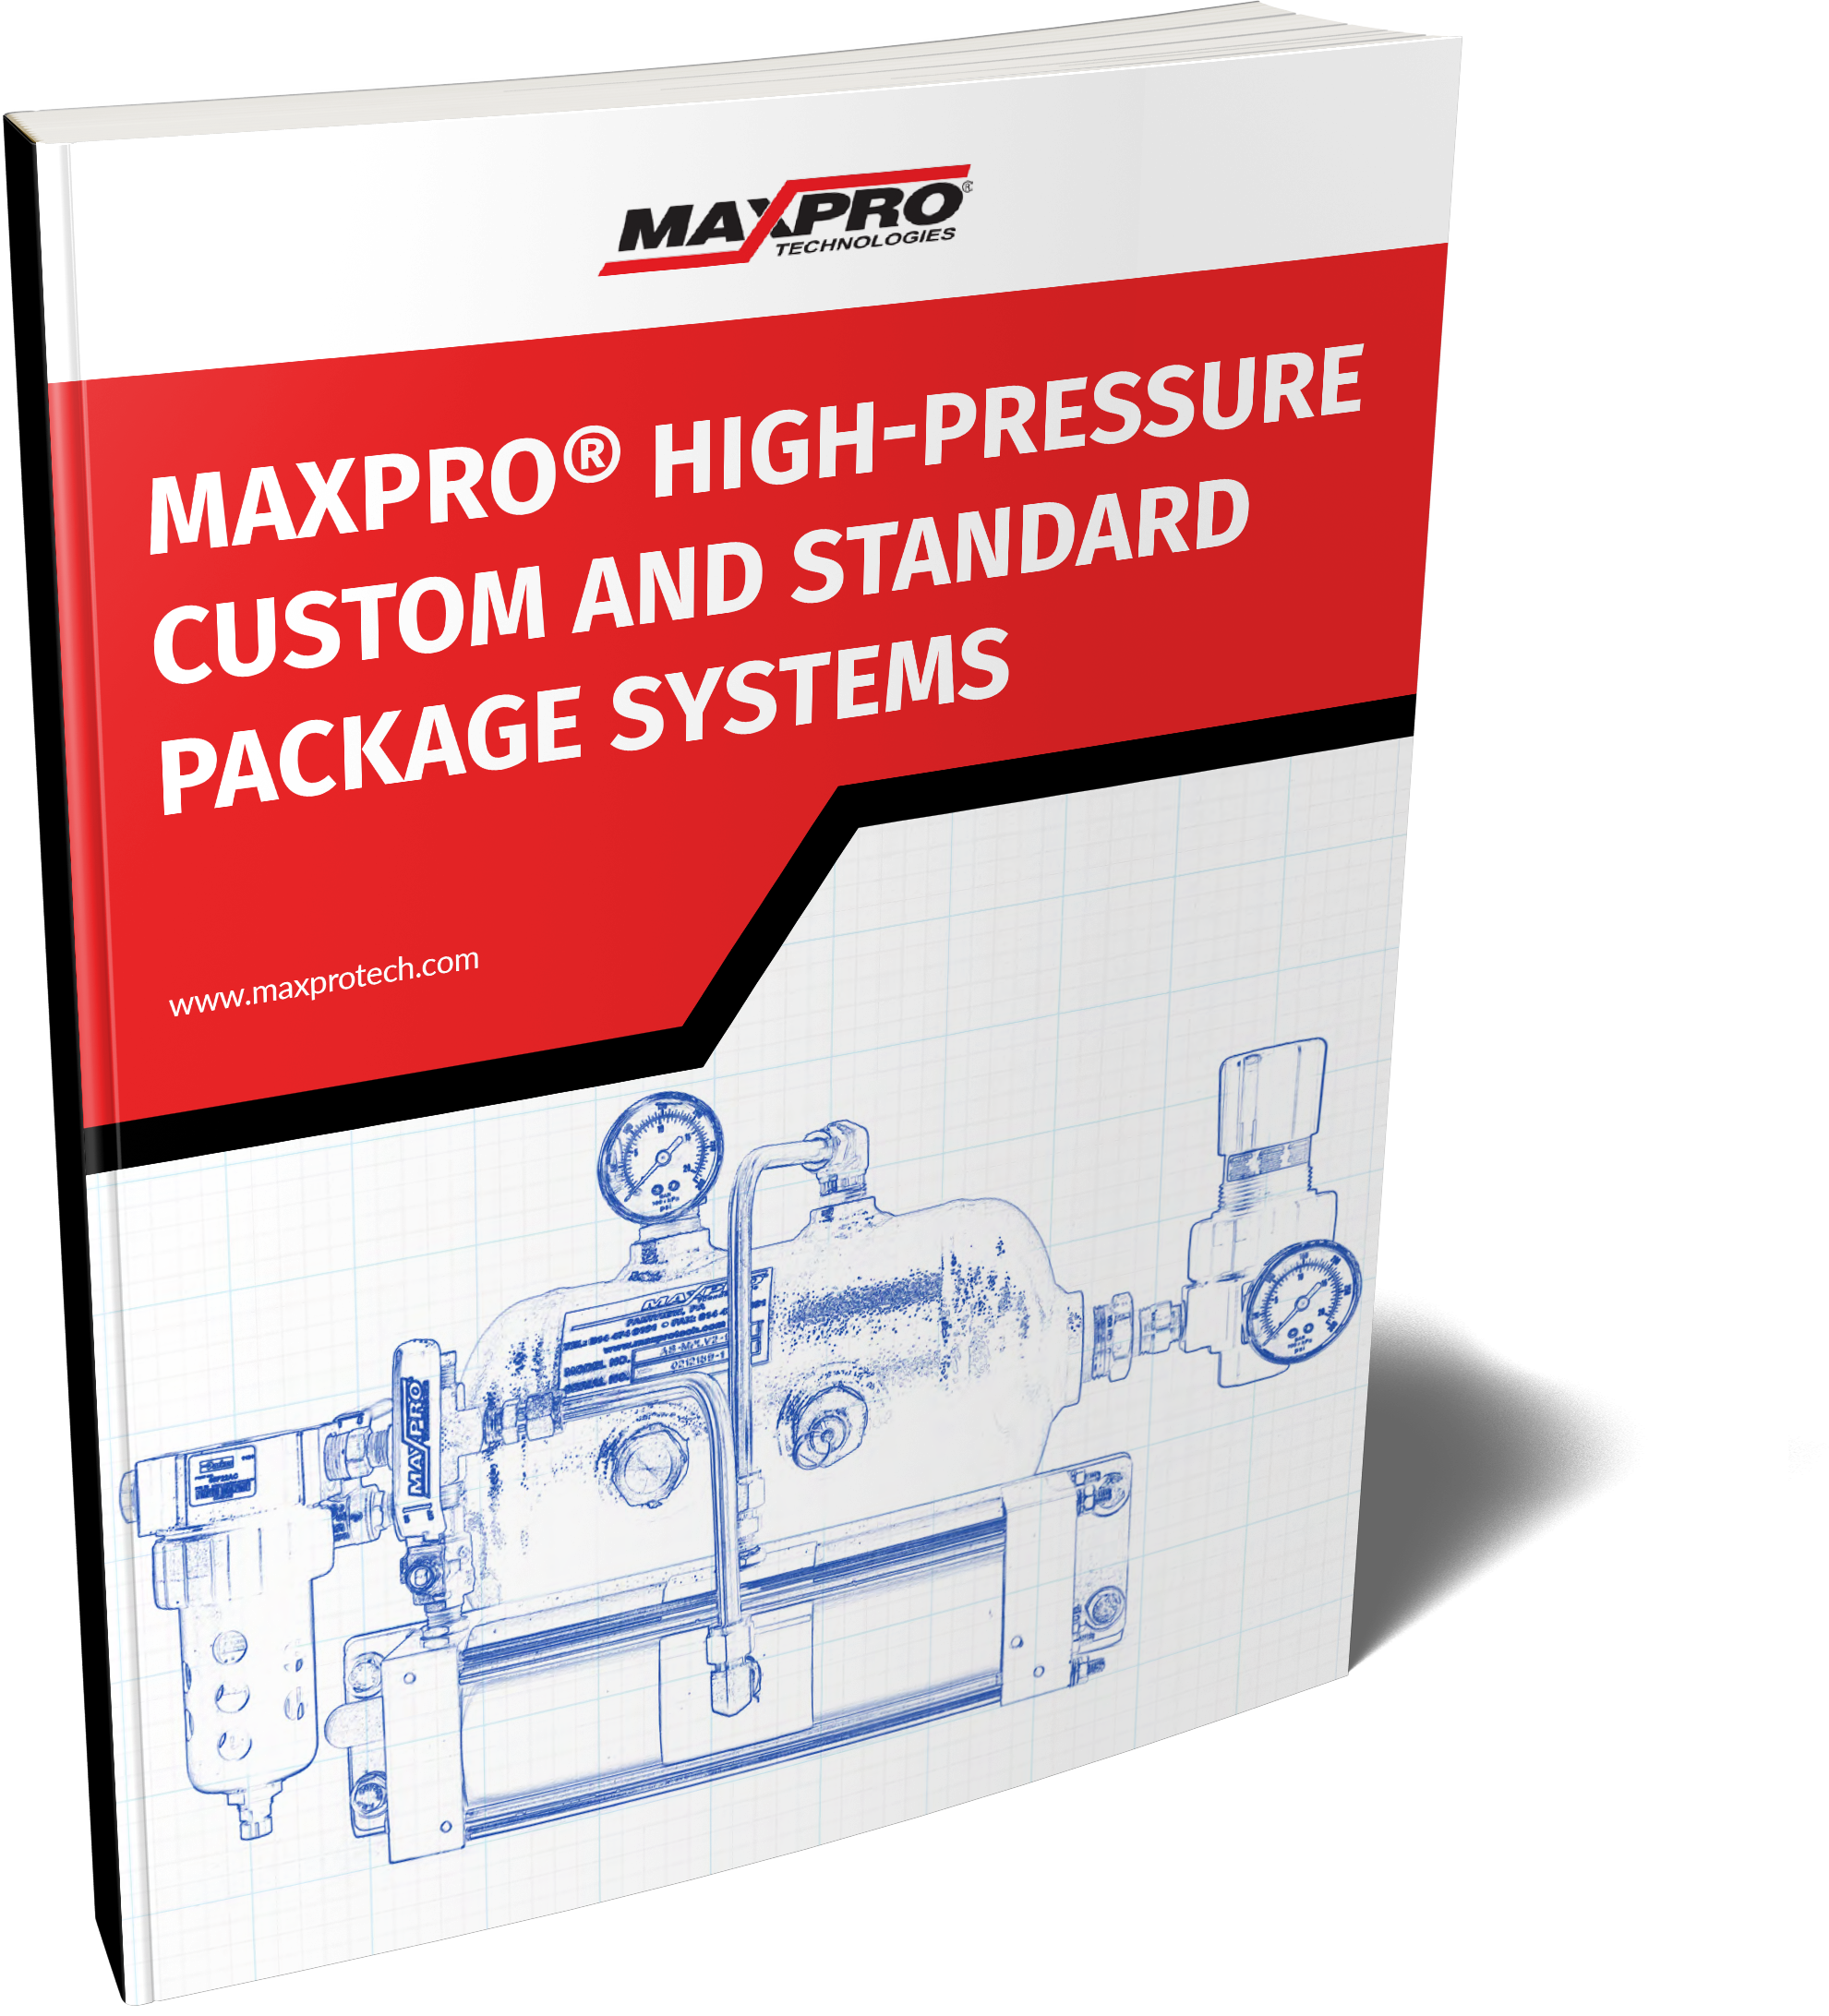 Maxpro® High-pressure Custom And Standard Package Systems